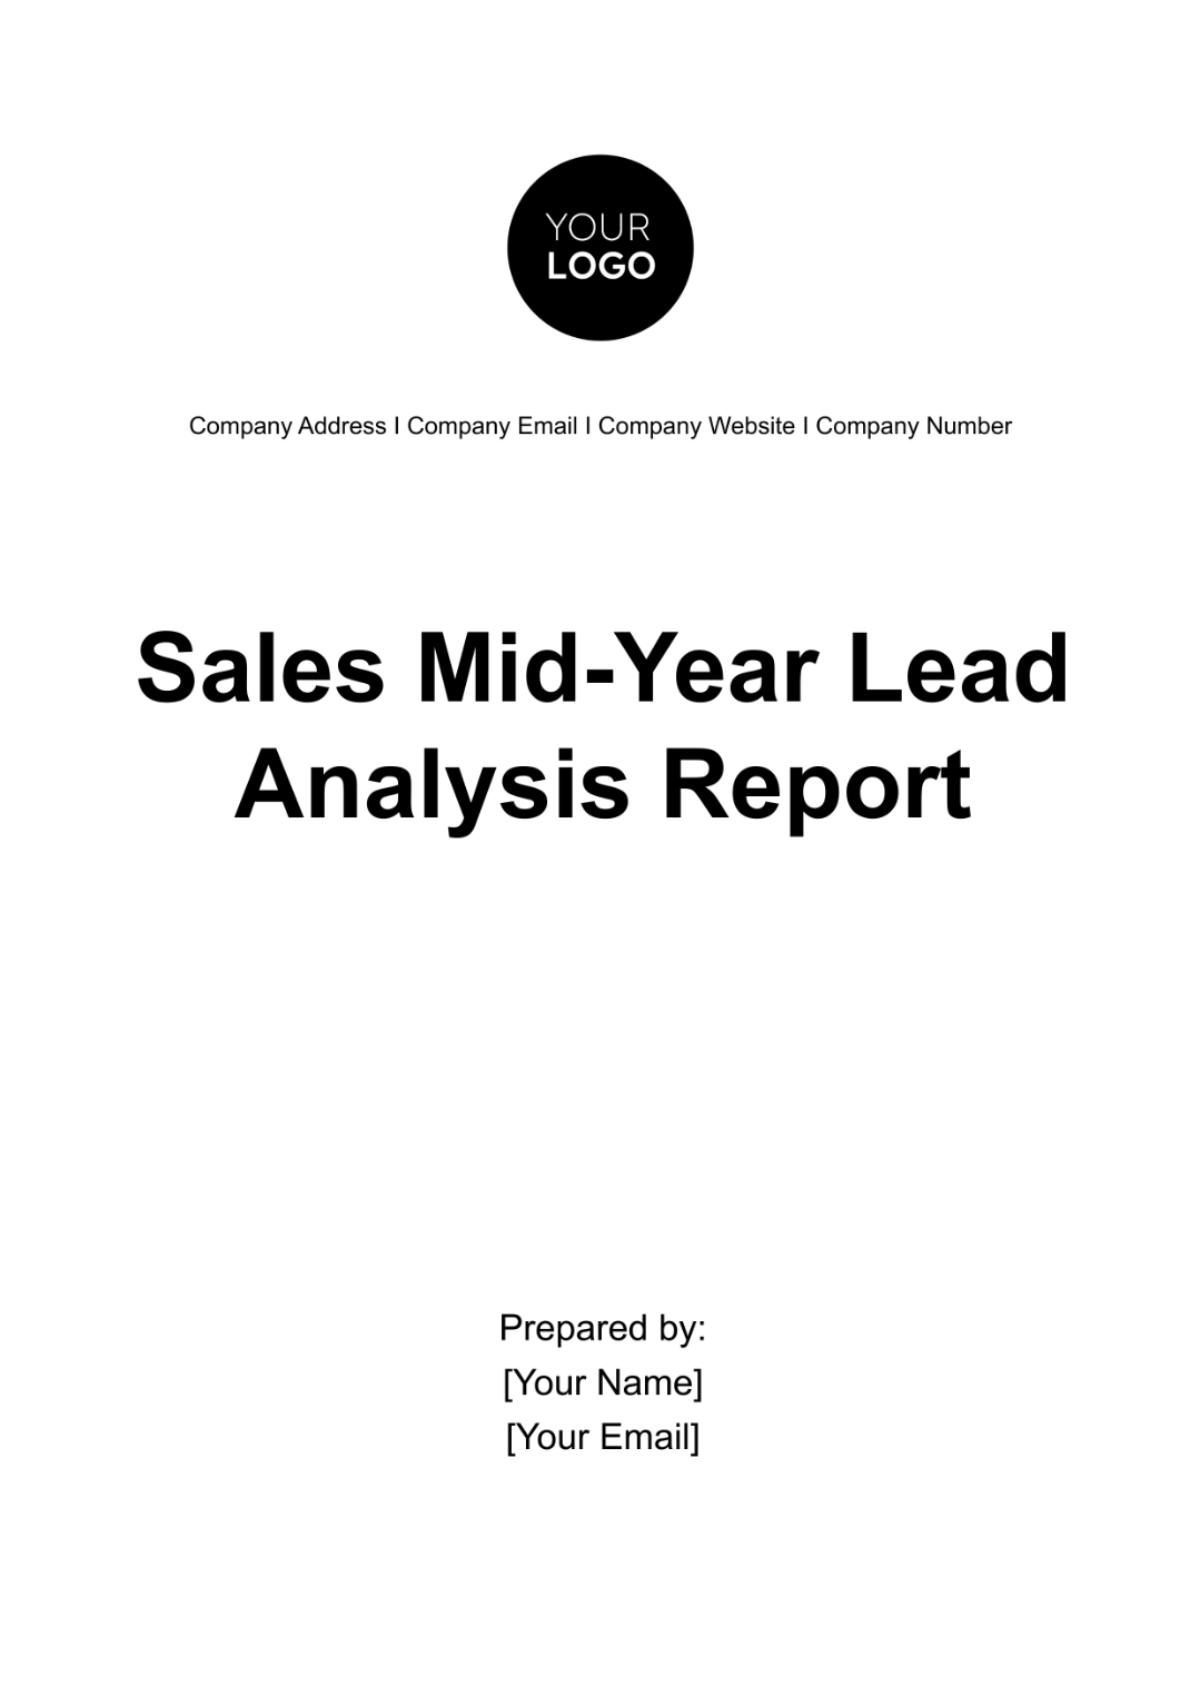 Free Sales Mid-Year Lead Analysis Report Template